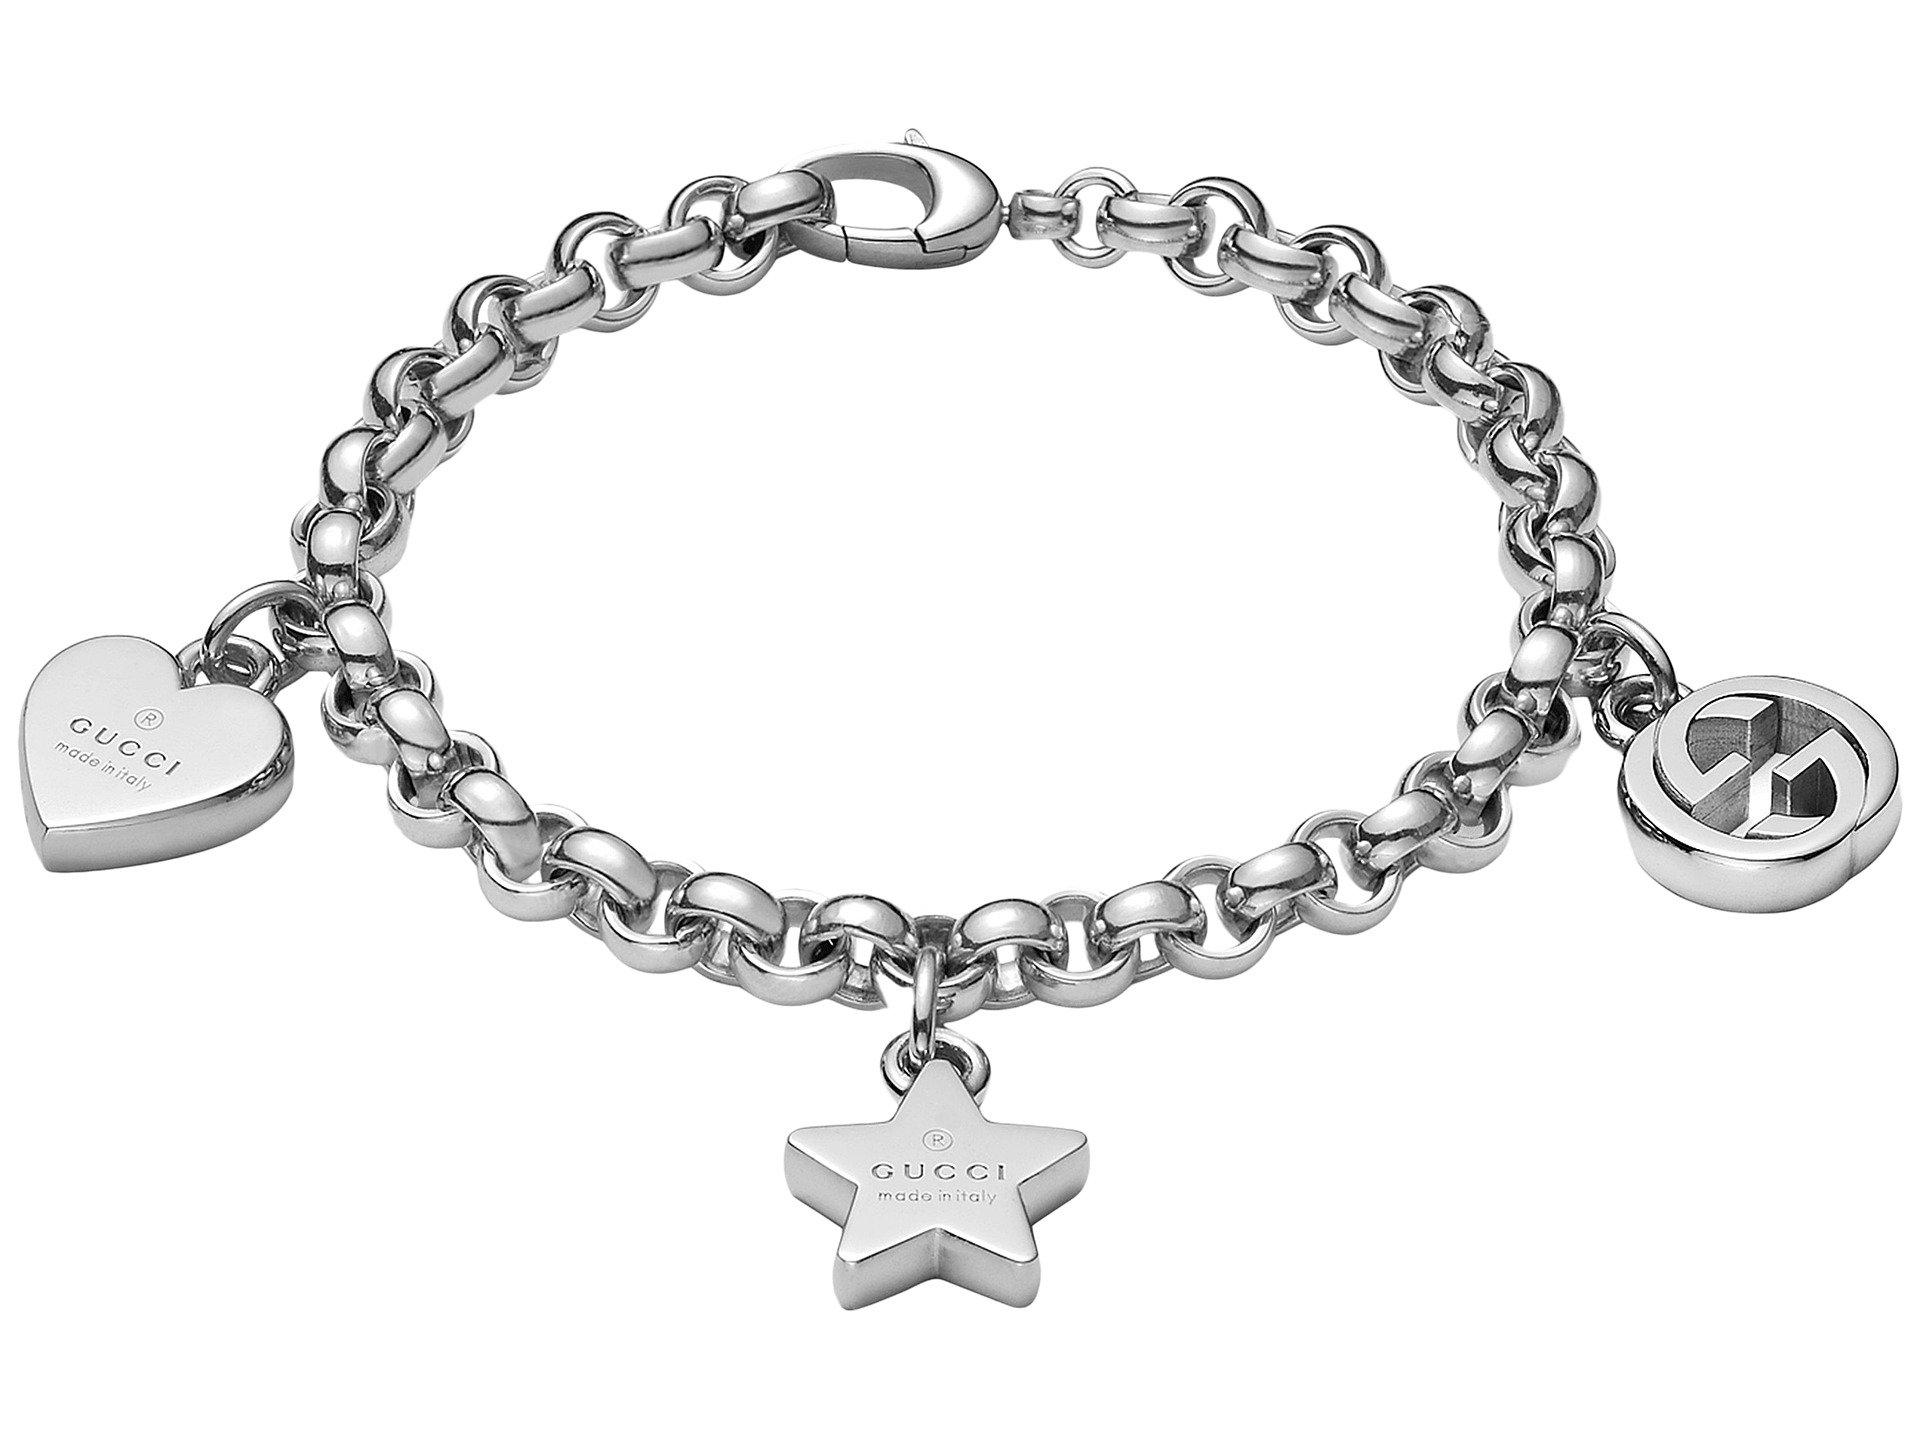 Modsigelse bunke Interconnect Gucci Trademark Bracelet W/ Heart, Star And Interlocking G Charms in  Metallic | Lyst